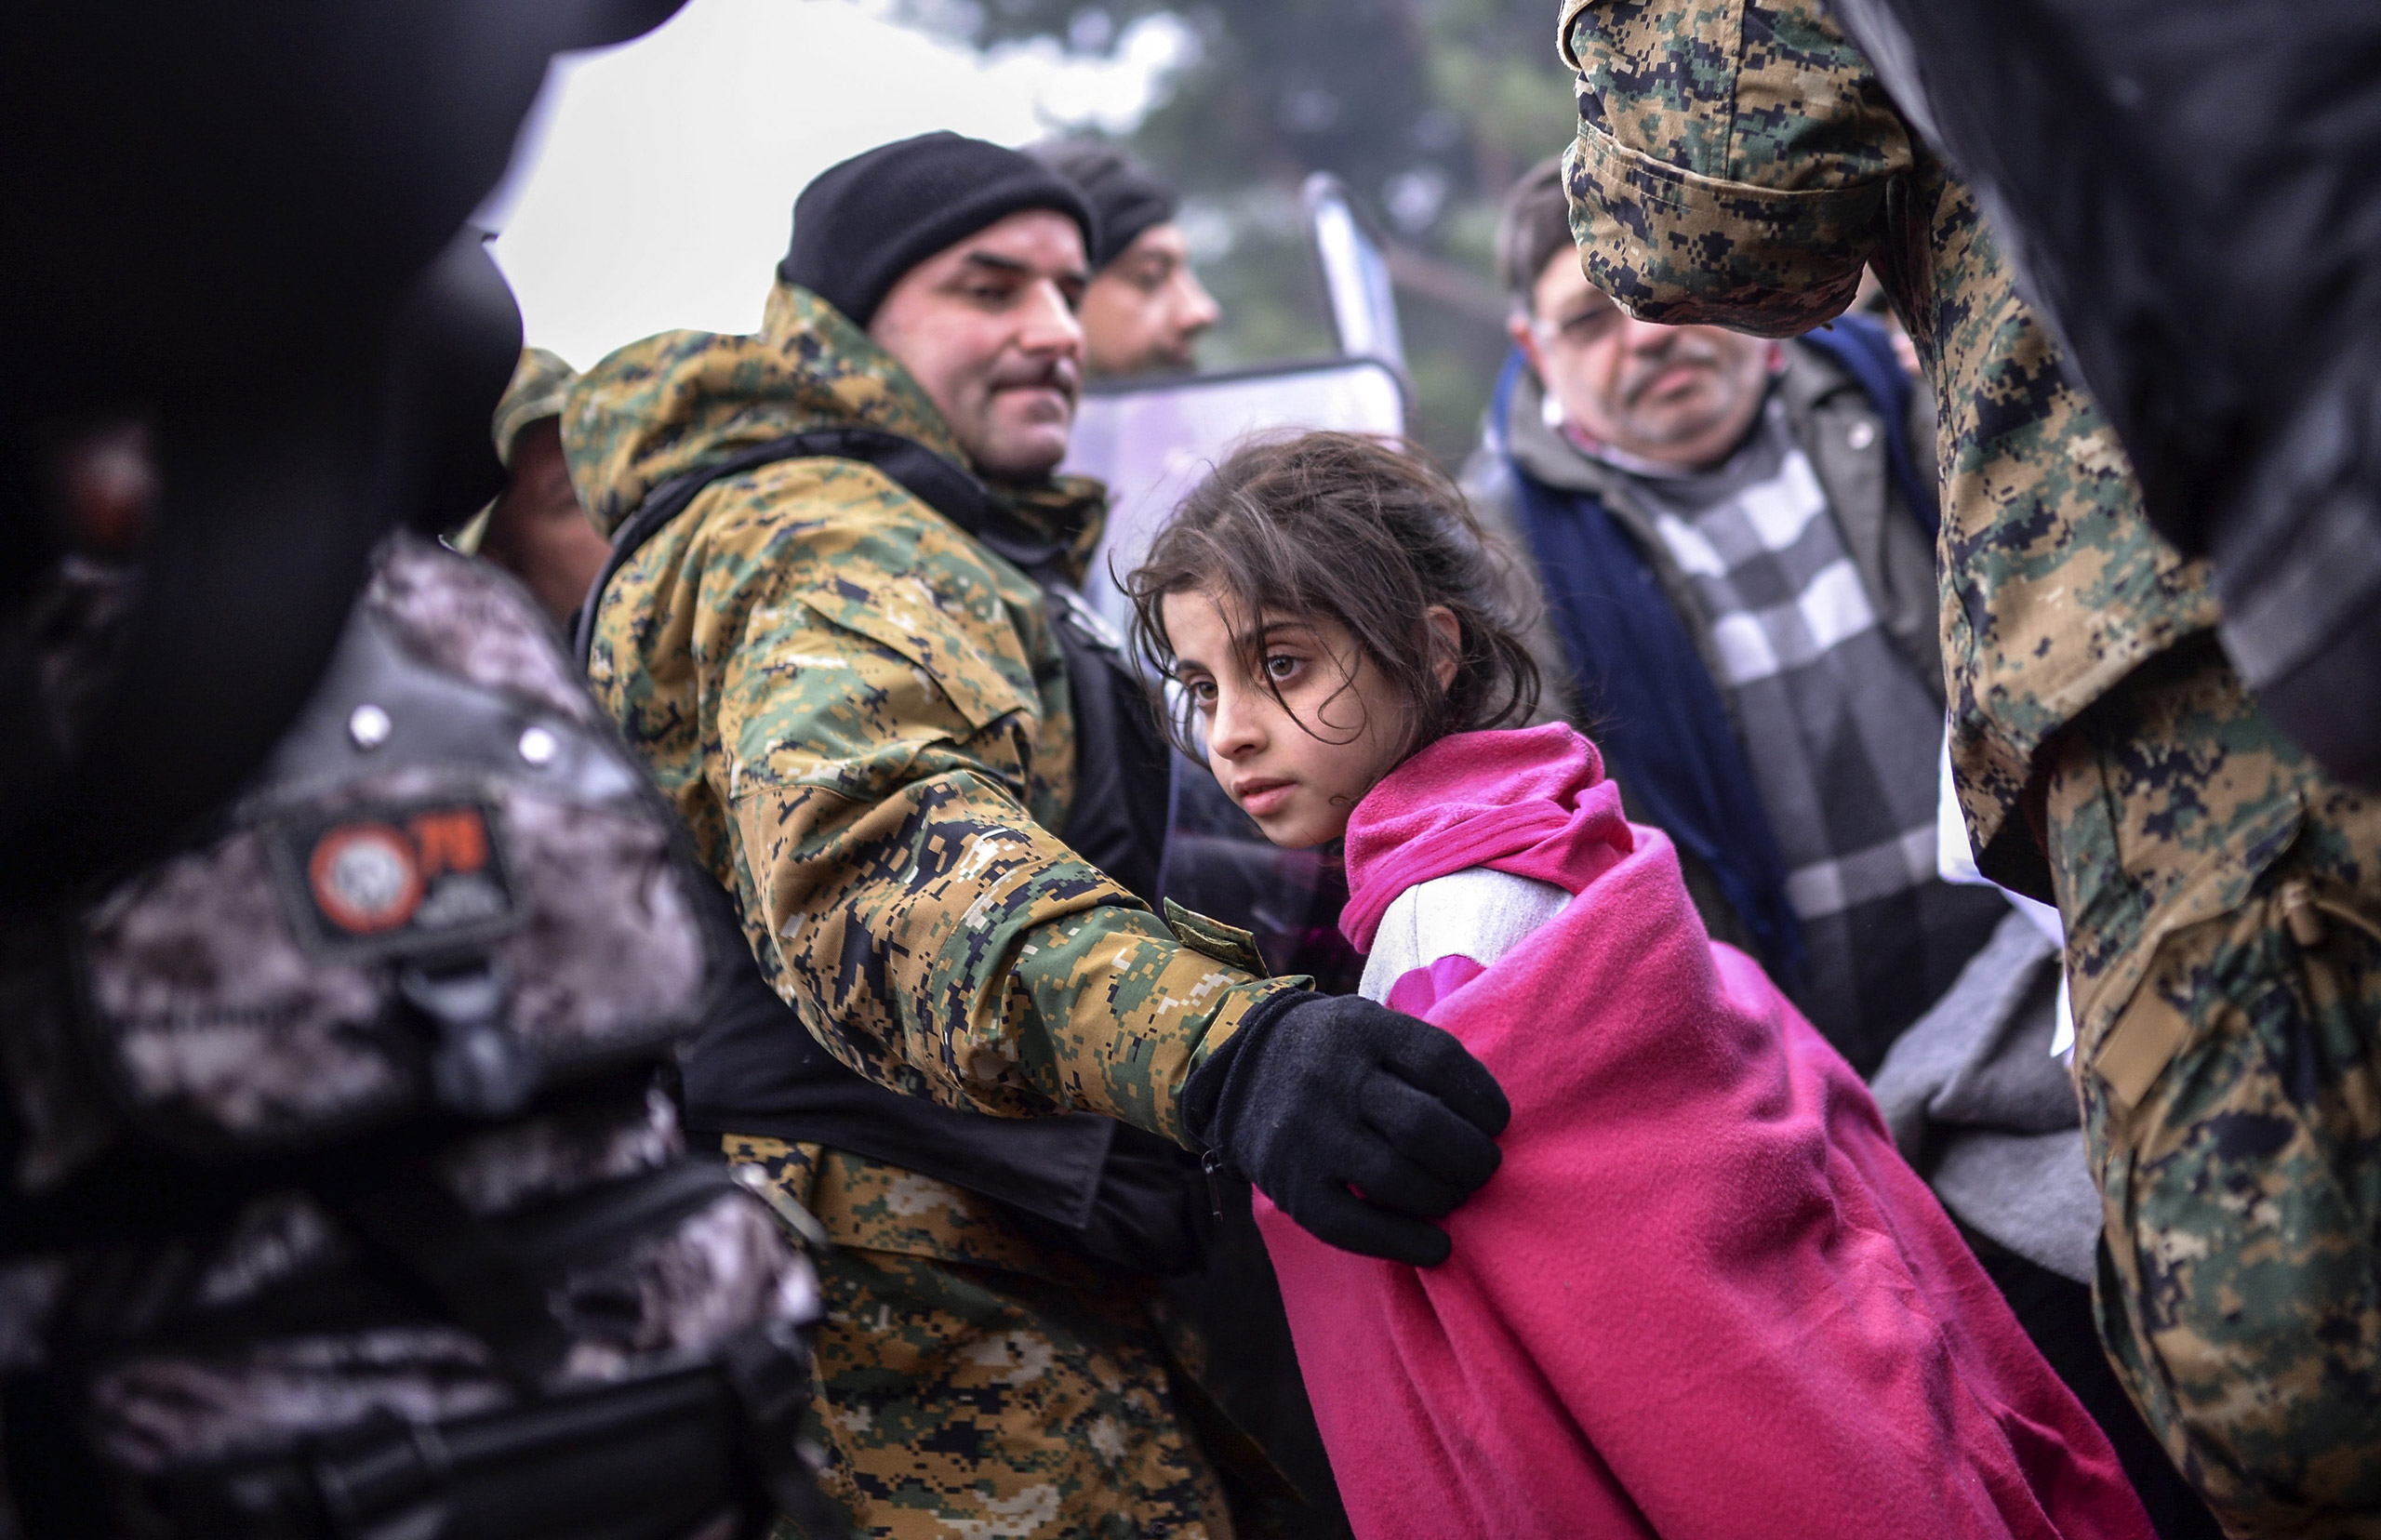 A Macedonian police officer helps a girl move past the cordon on the Greek-Macedonian border after Macedonia has started letting in refugees from Syria, Iraq and Afghanistan, near Gevegelija, Macedonia, on 20 Nov. 2015. (Georgi Licovski—EPA)